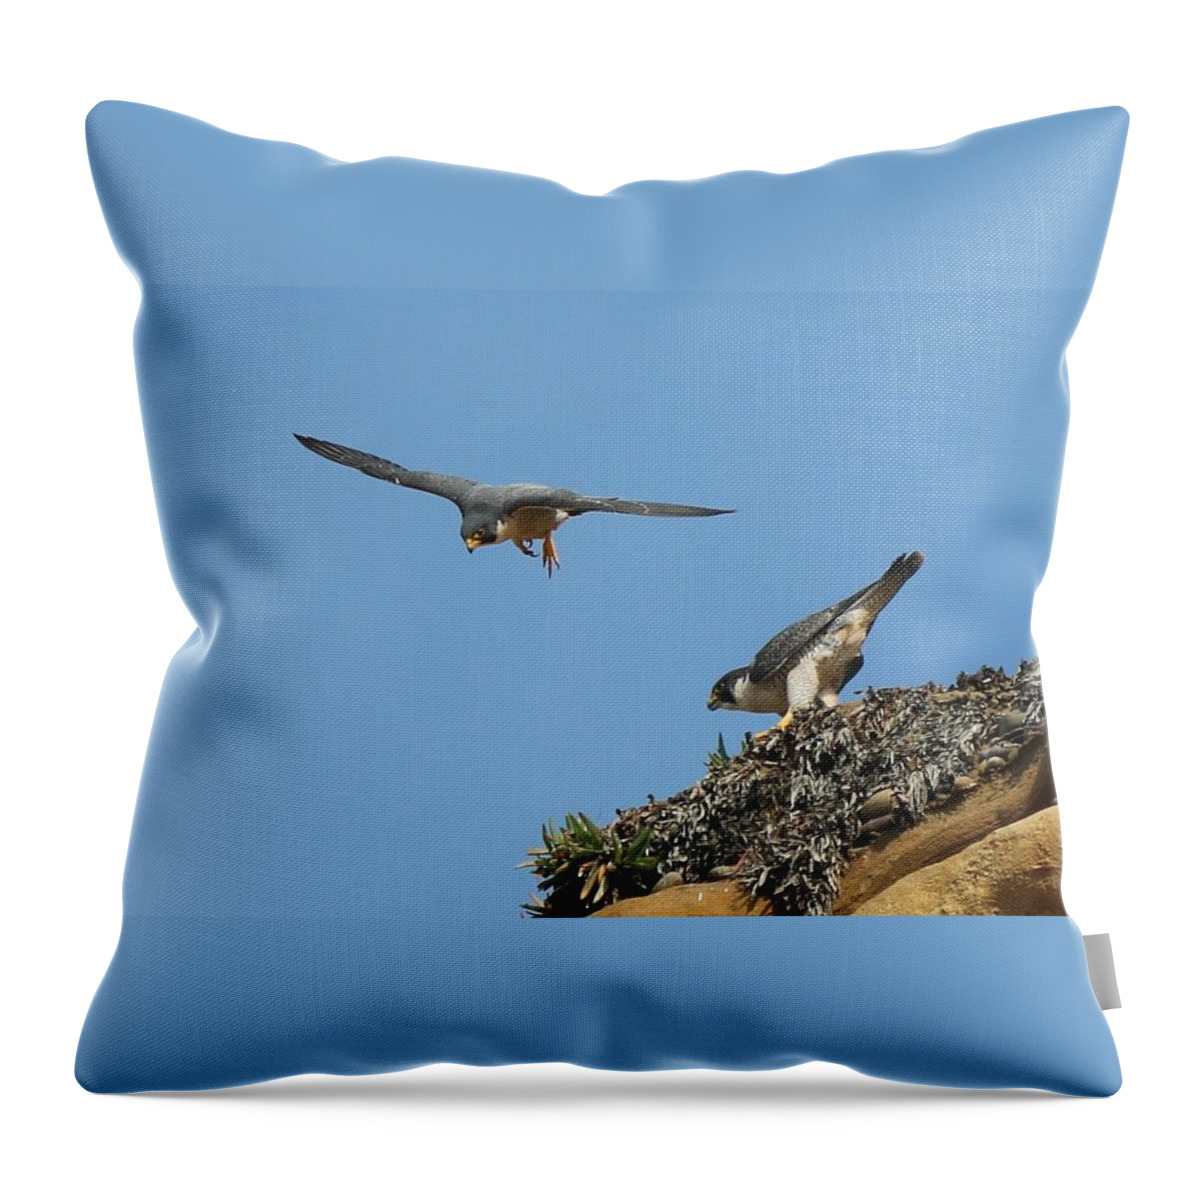 Peregrine Throw Pillow featuring the photograph Peregrine Falcons - 6 by Christy Pooschke